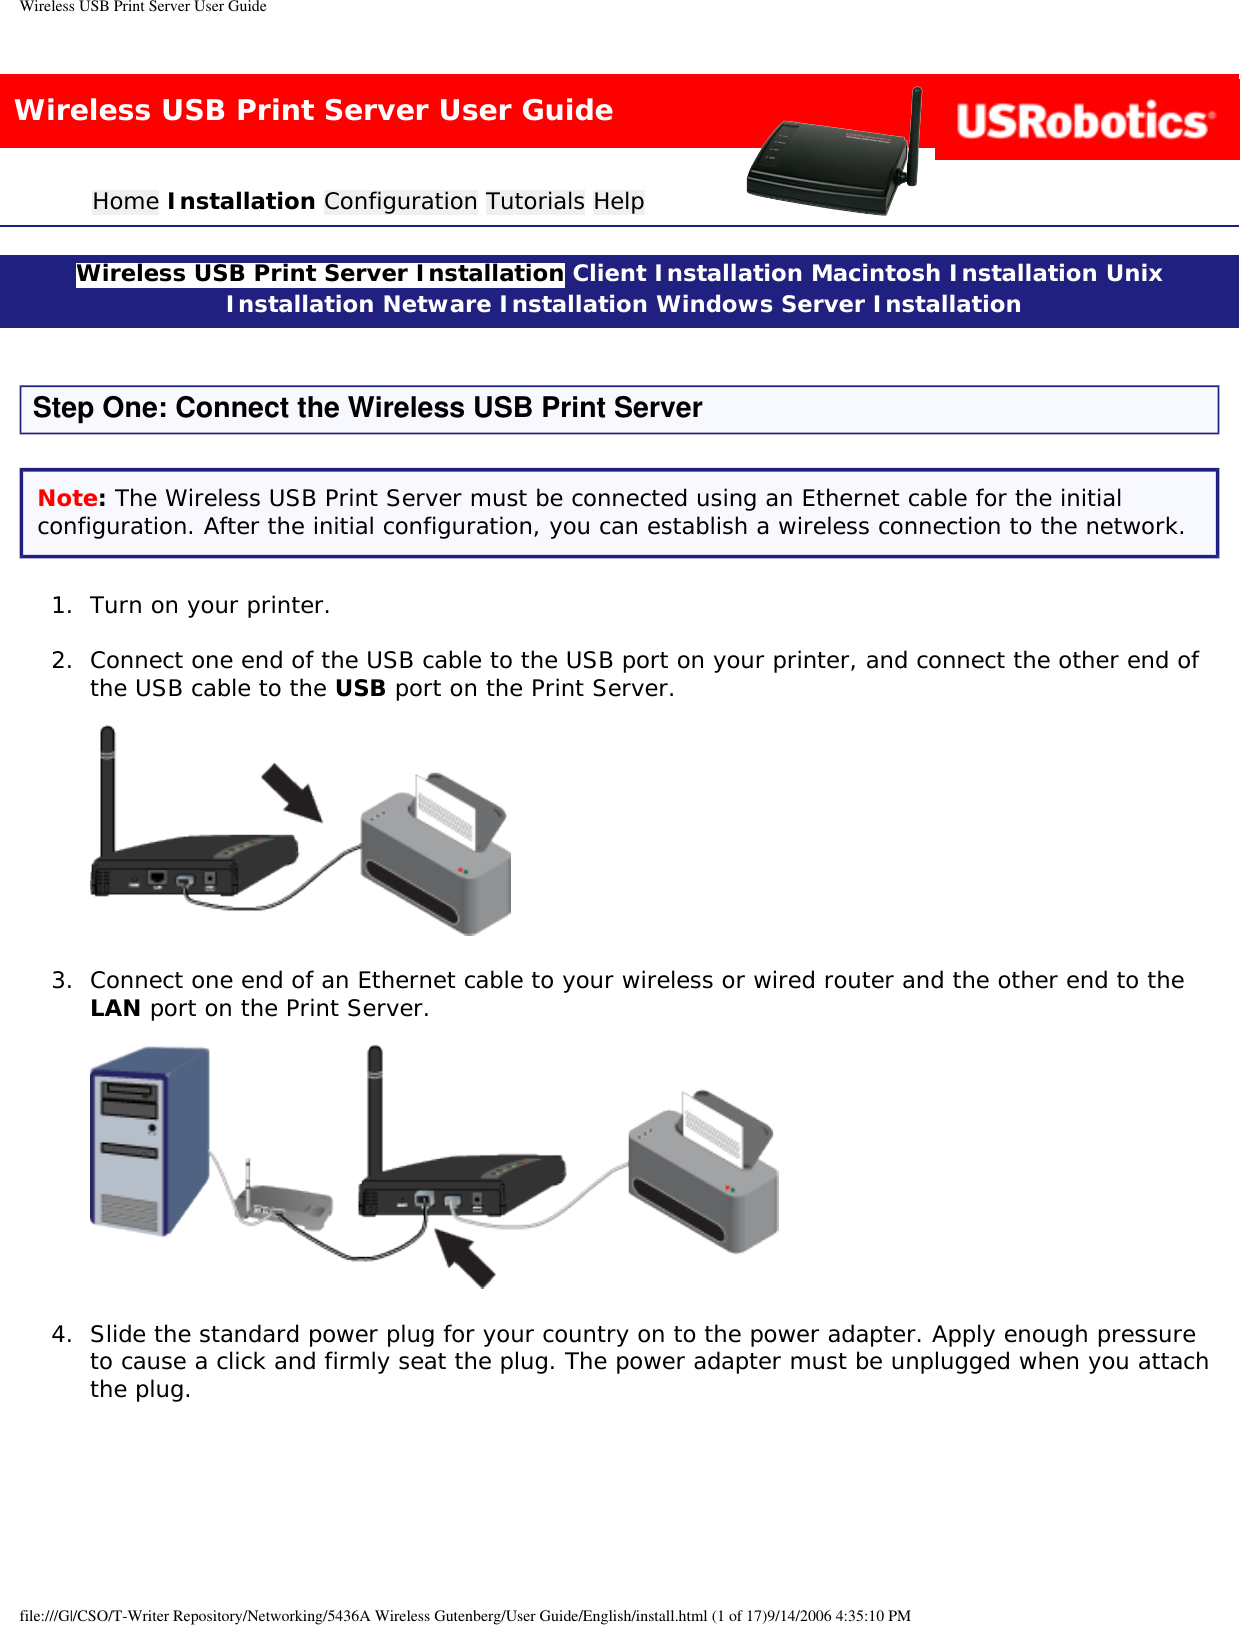 Wireless USB Print Server User GuideWireless USB Print Server User GuideHome Installation Configuration Tutorials Help Wireless USB Print Server Installation Client Installation Macintosh Installation Unix Installation Netware Installation Windows Server Installation Step One: Connect the Wireless USB Print ServerNote: The Wireless USB Print Server must be connected using an Ethernet cable for the initial configuration. After the initial configuration, you can establish a wireless connection to the network.1.  Turn on your printer. 2.  Connect one end of the USB cable to the USB port on your printer, and connect the other end of the USB cable to the USB port on the Print Server.   3.  Connect one end of an Ethernet cable to your wireless or wired router and the other end to the LAN port on the Print Server.   4.  Slide the standard power plug for your country on to the power adapter. Apply enough pressure to cause a click and firmly seat the plug. The power adapter must be unplugged when you attach the plug.  file:///G|/CSO/T-Writer Repository/Networking/5436A Wireless Gutenberg/User Guide/English/install.html (1 of 17)9/14/2006 4:35:10 PM